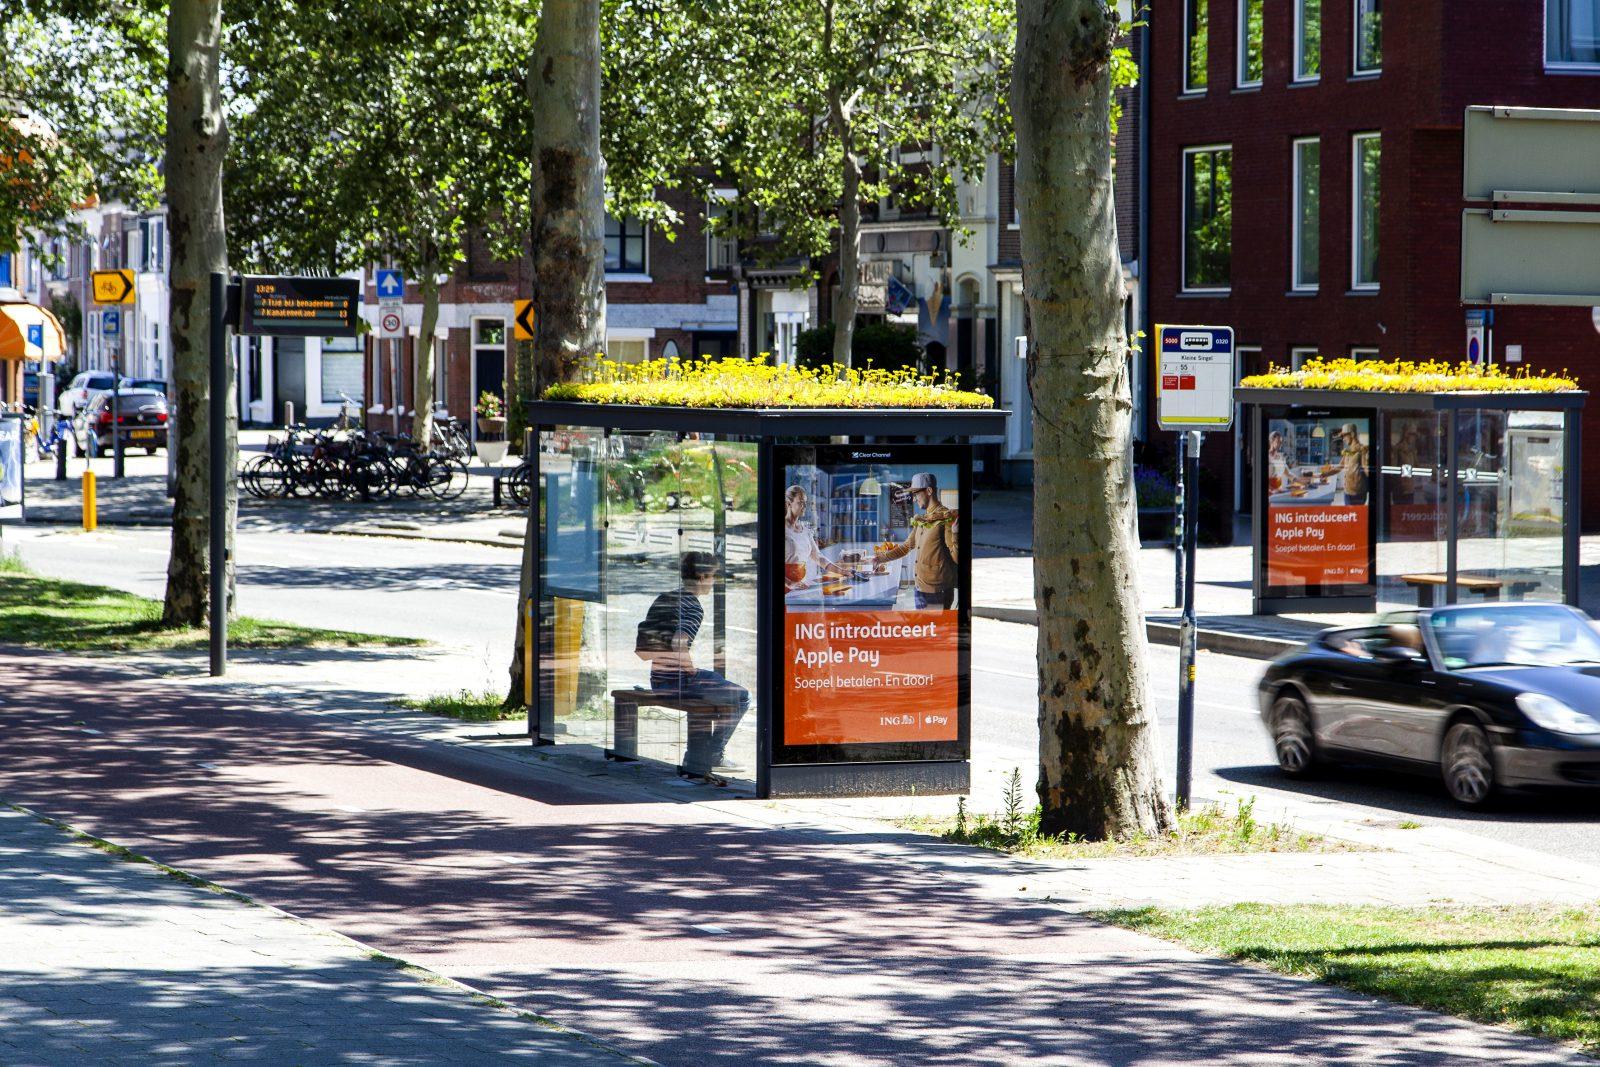 A bus shelter in the city of Utrecht with yellow flowers planted on the roof.